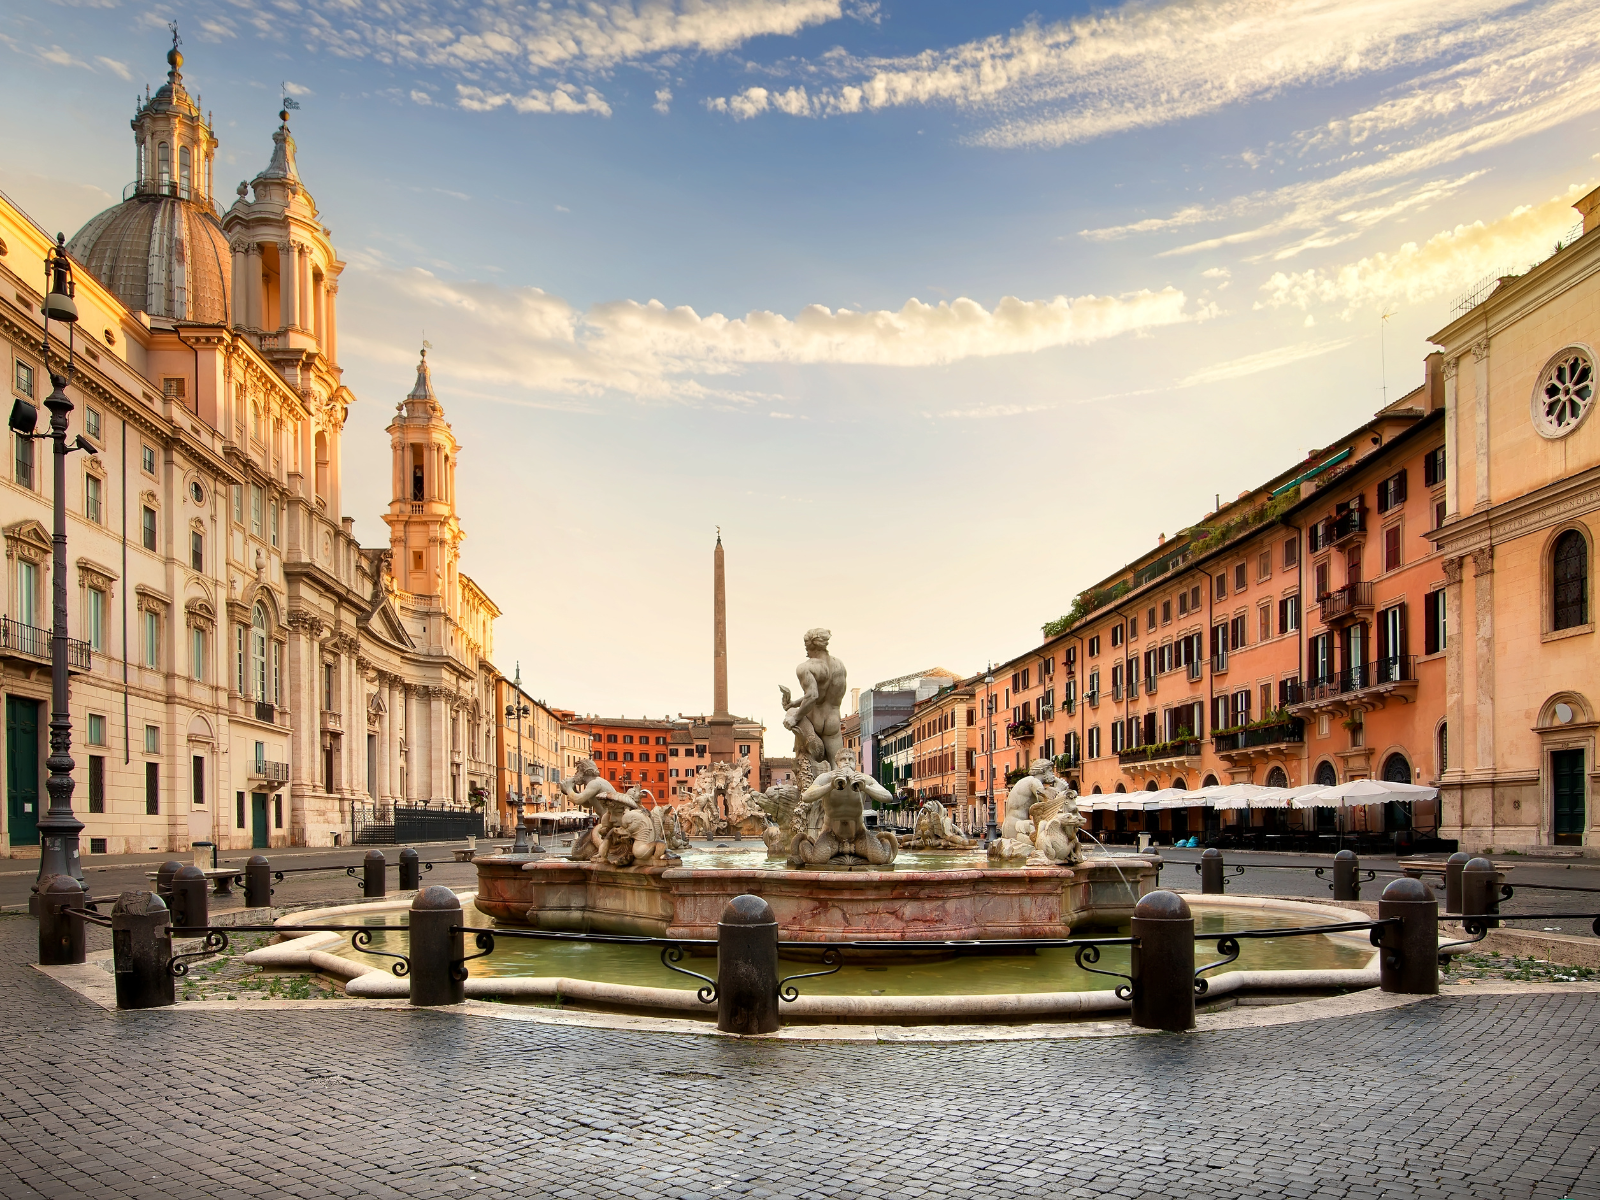 Piazza Navona is one of the most famous squares of Rome.